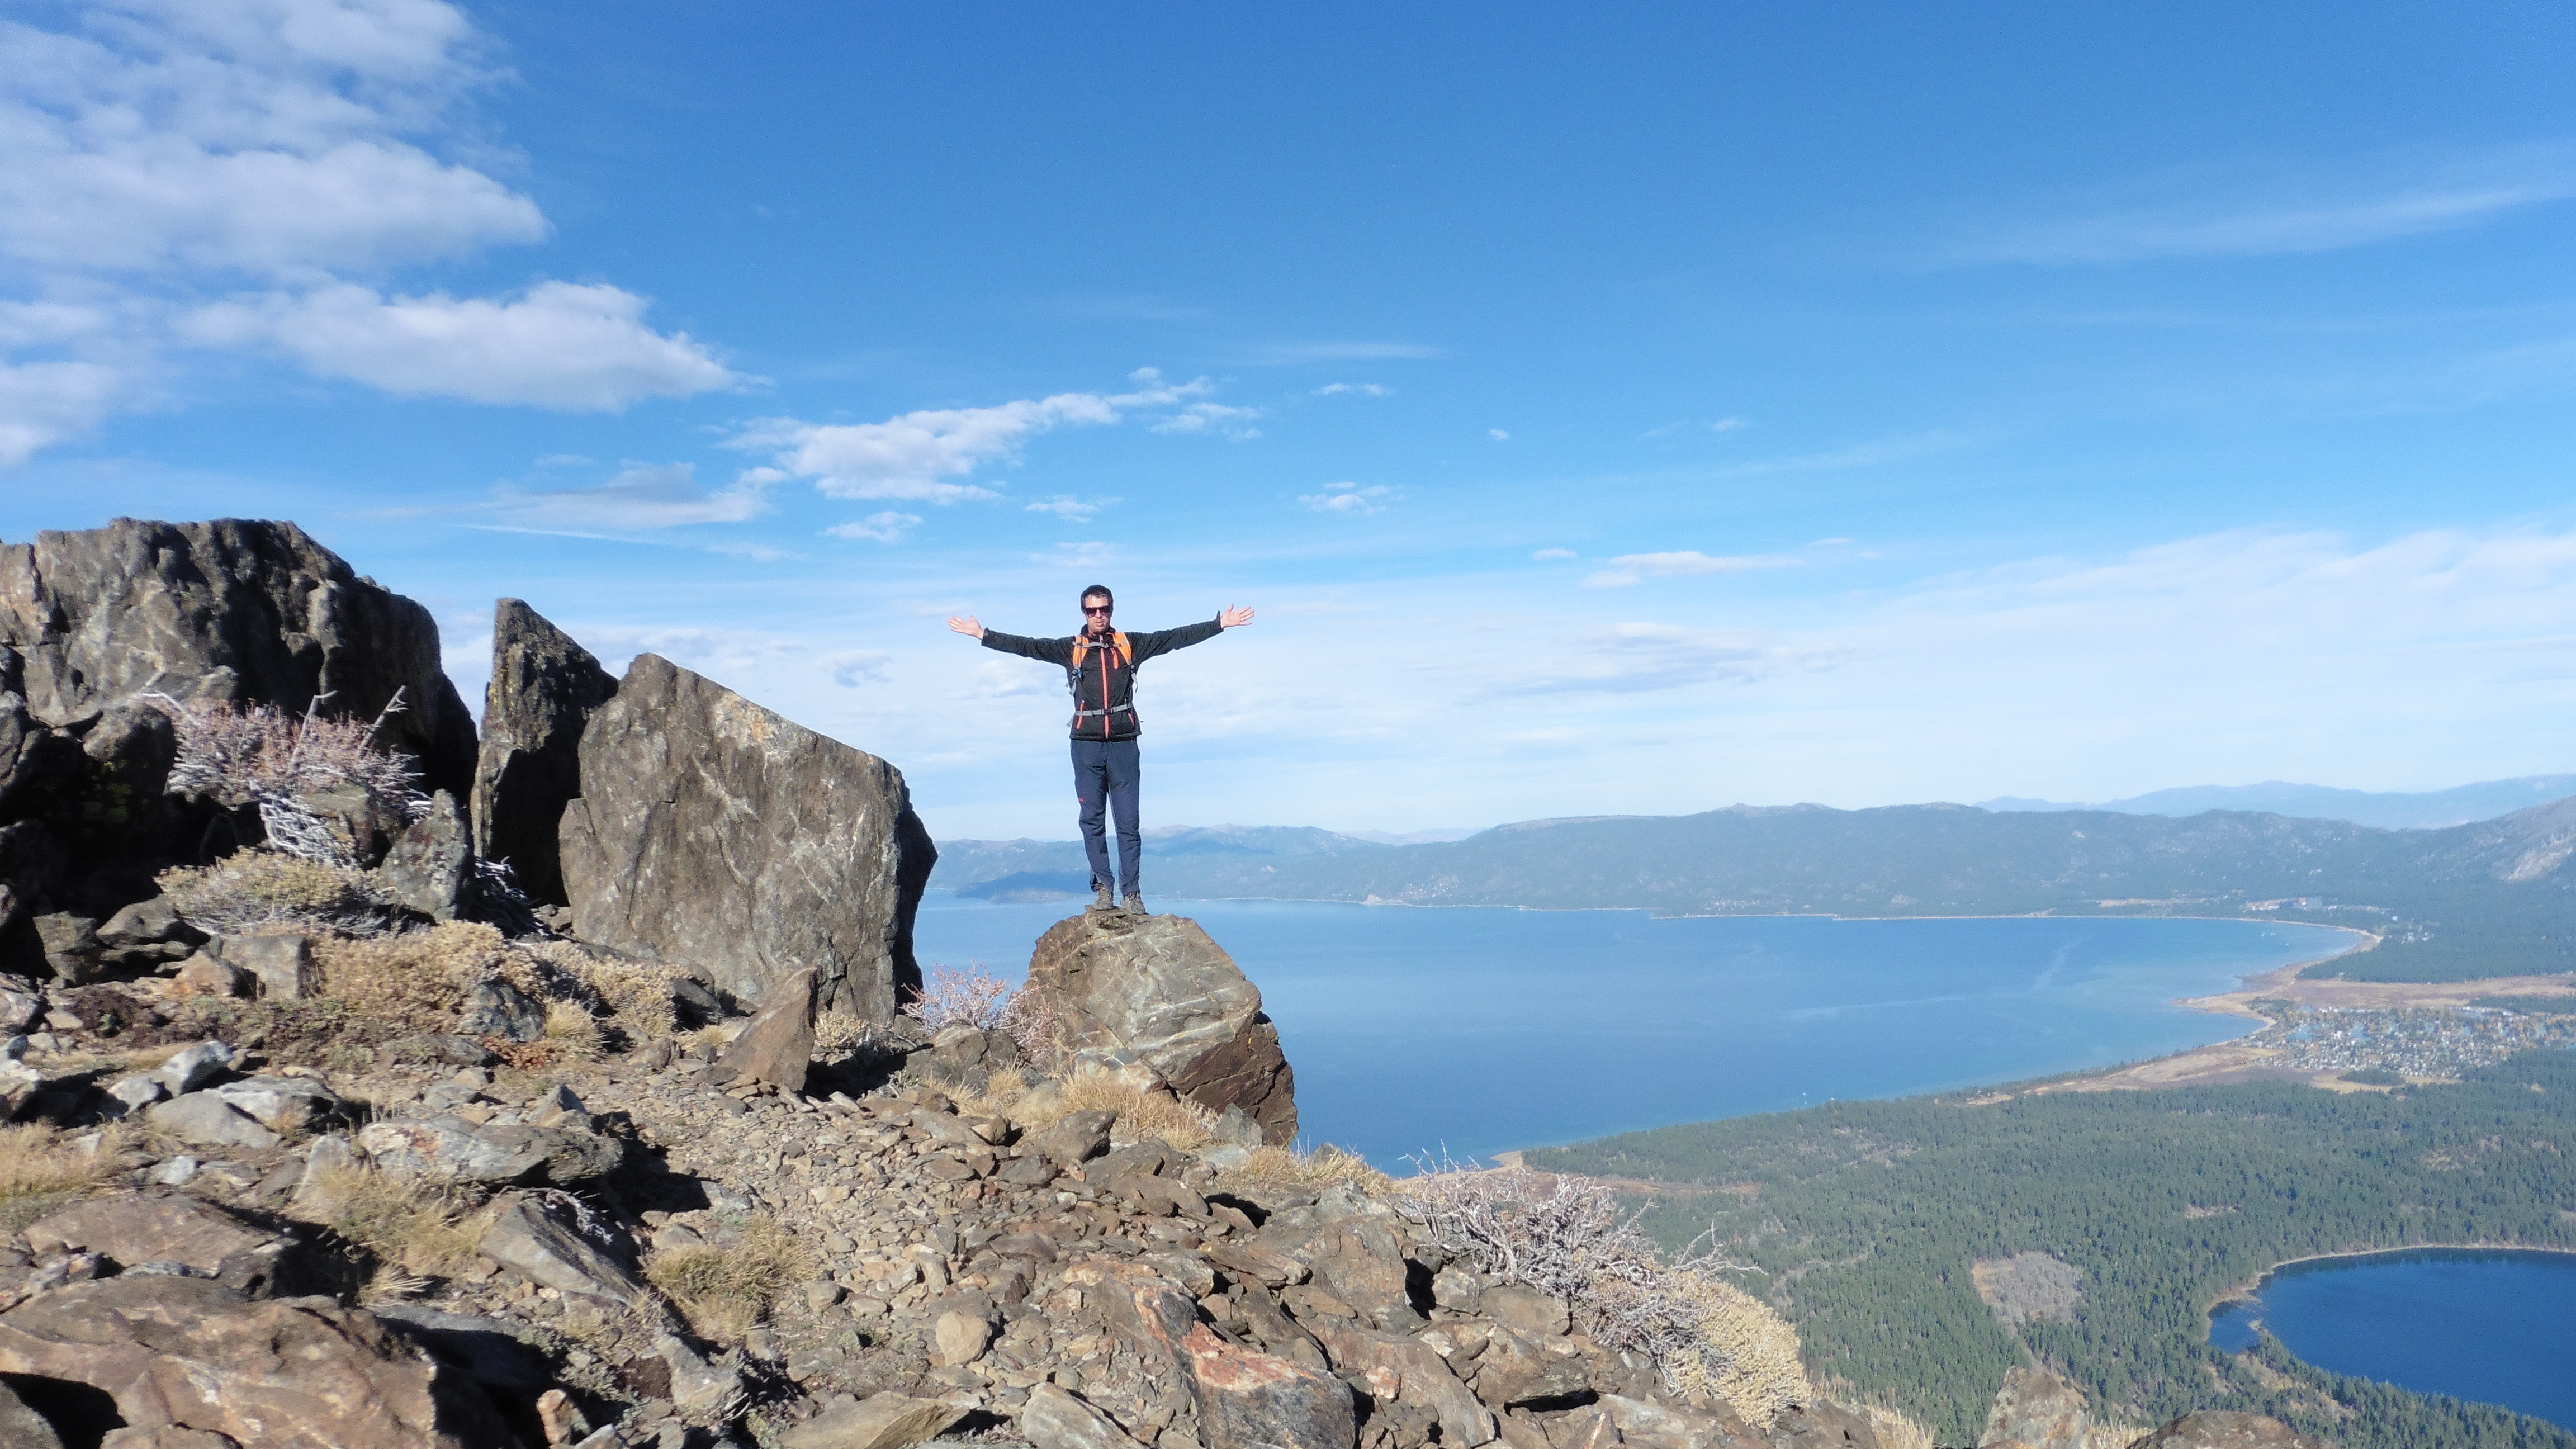 honza standing one a mountain arms outstretched by lake tahoe